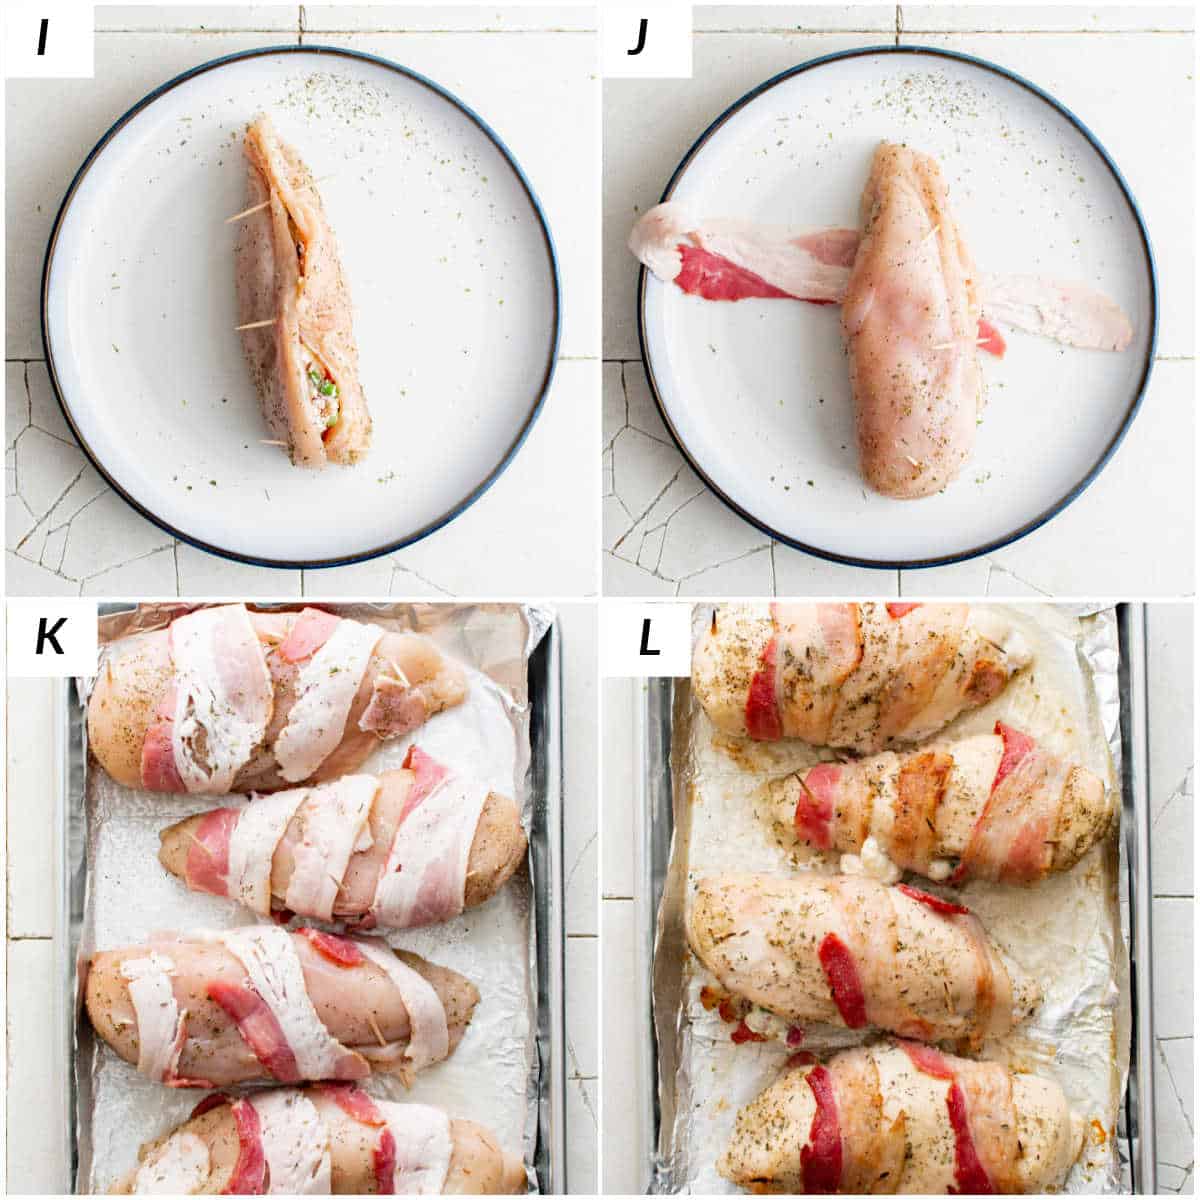 image collage showing the final steps for making bacon wrapped stuffed chicken breast